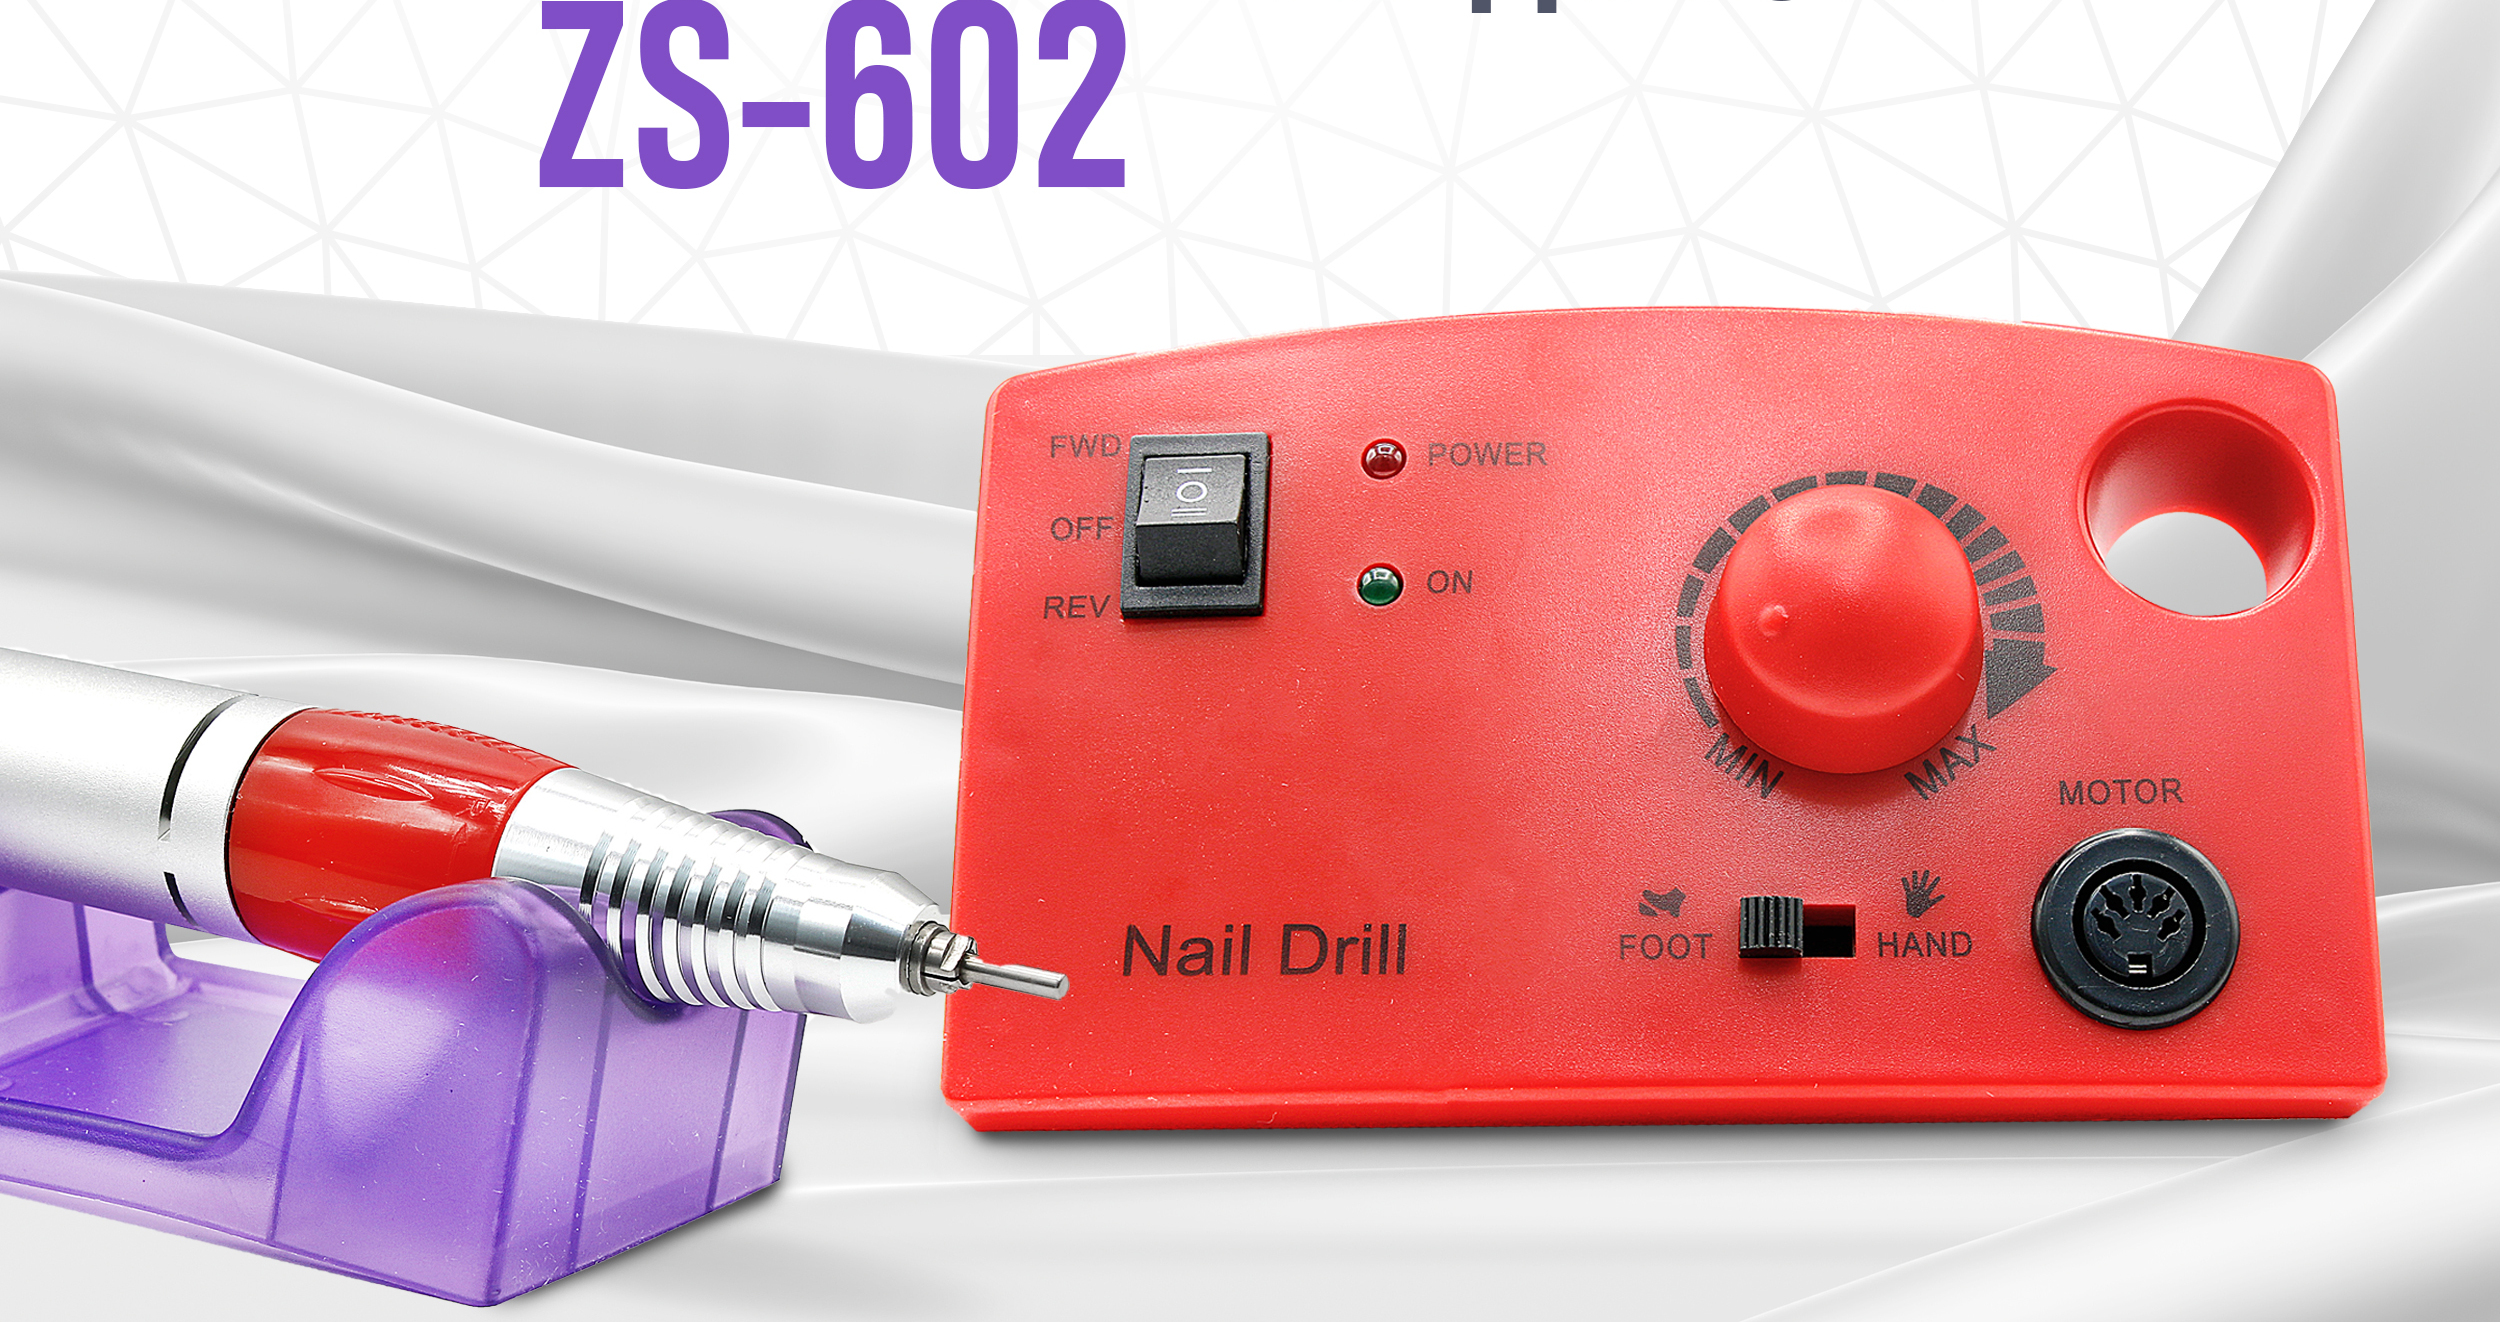 Manicure and pedicure nail drill ZS-602 45W 35000 rpm: High Quality